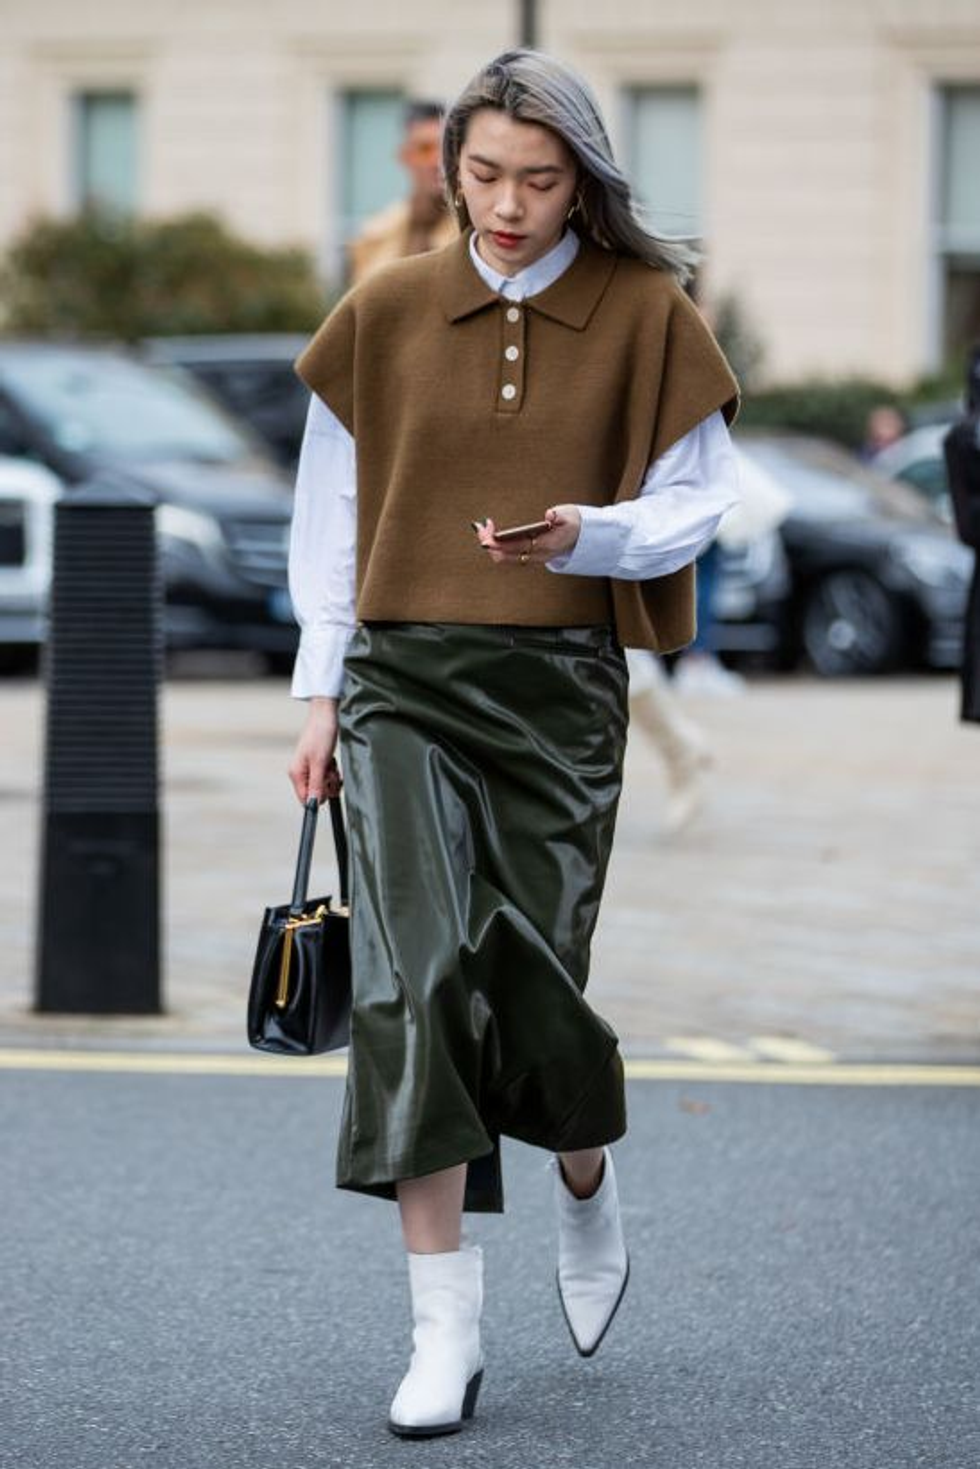 layer button up pieces with midi skirts and ankle boots